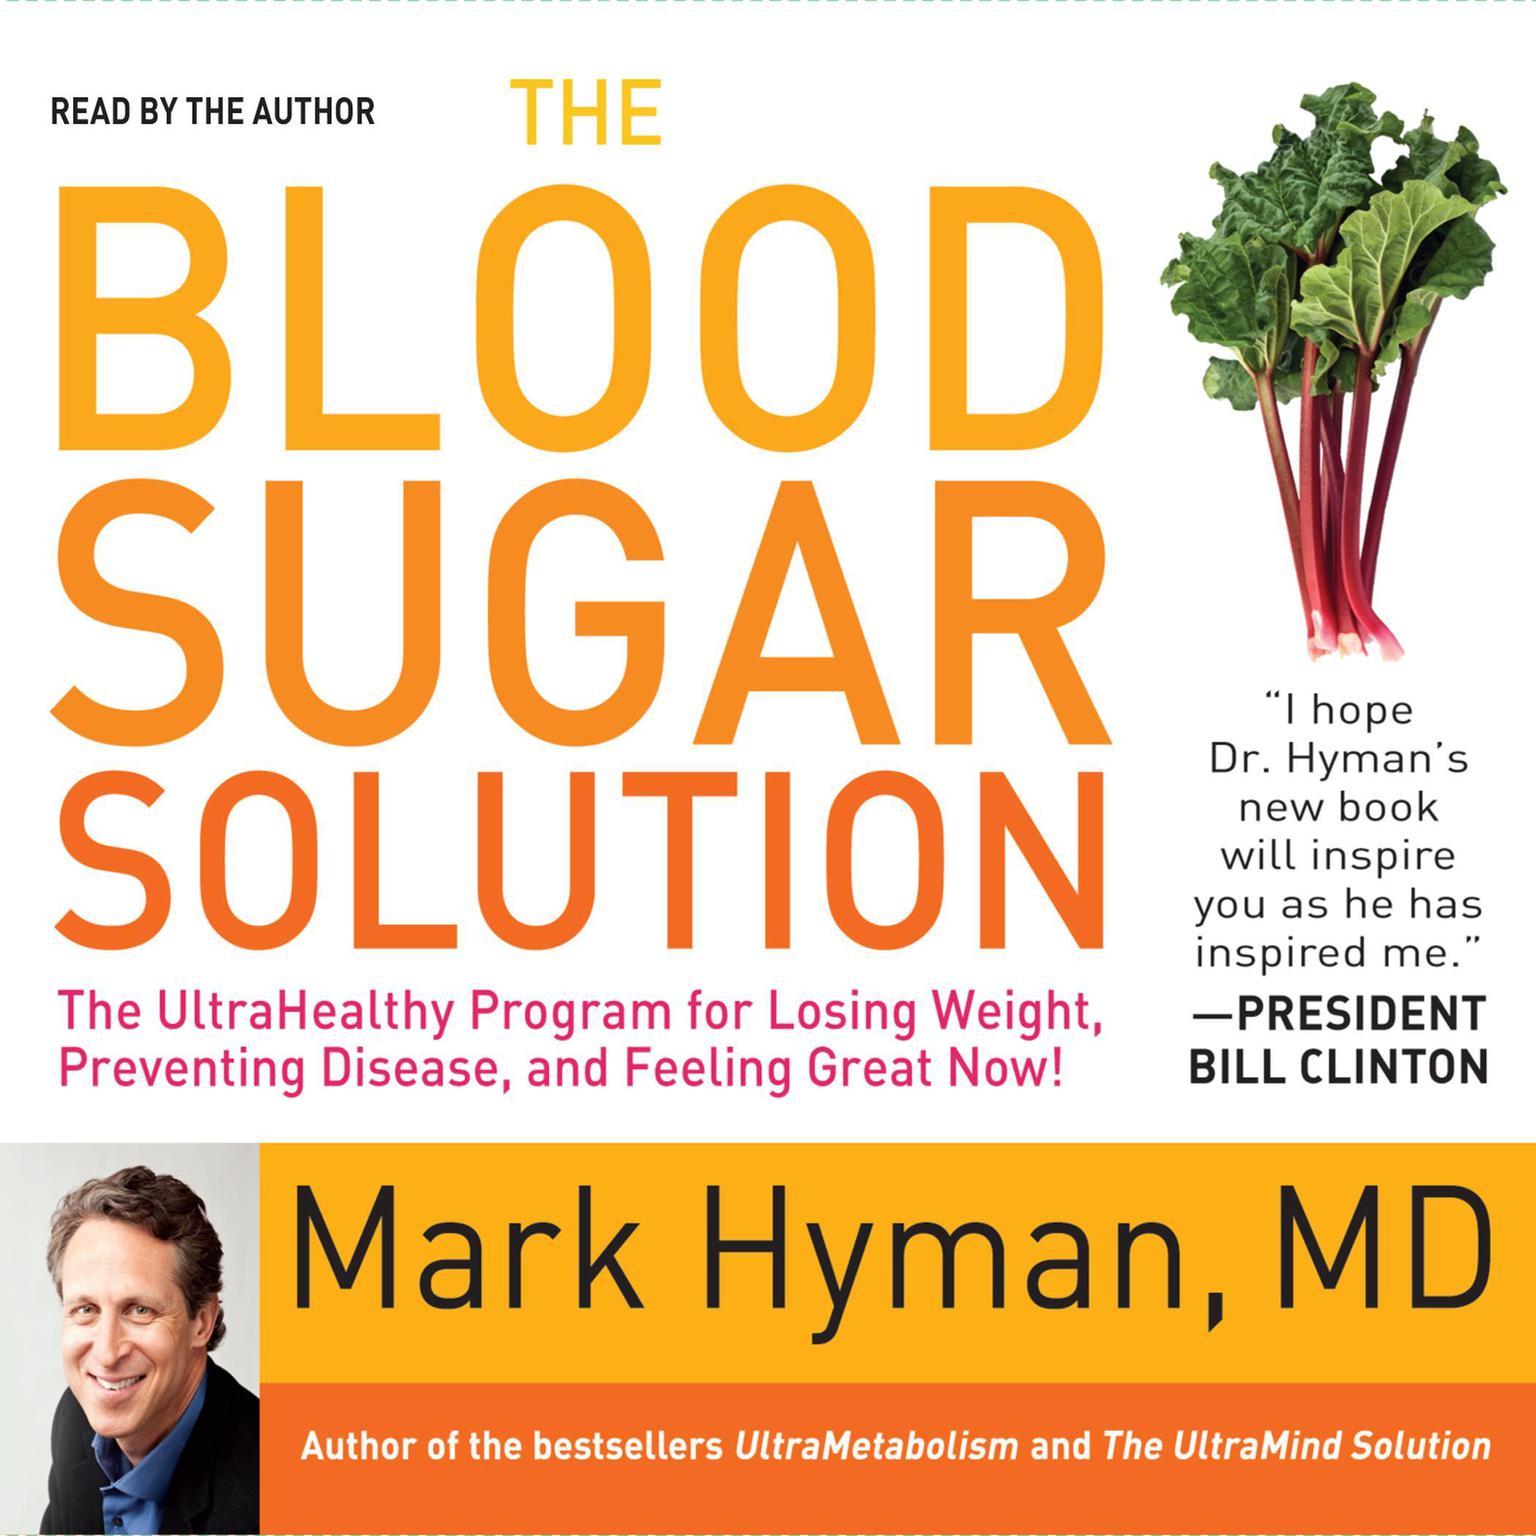 The Blood Sugar Solution (Abridged): The UltraHealthy Program for Losing Weight, Preventing Disease, and Feeling Great Now! Audiobook, by Mark Hyman